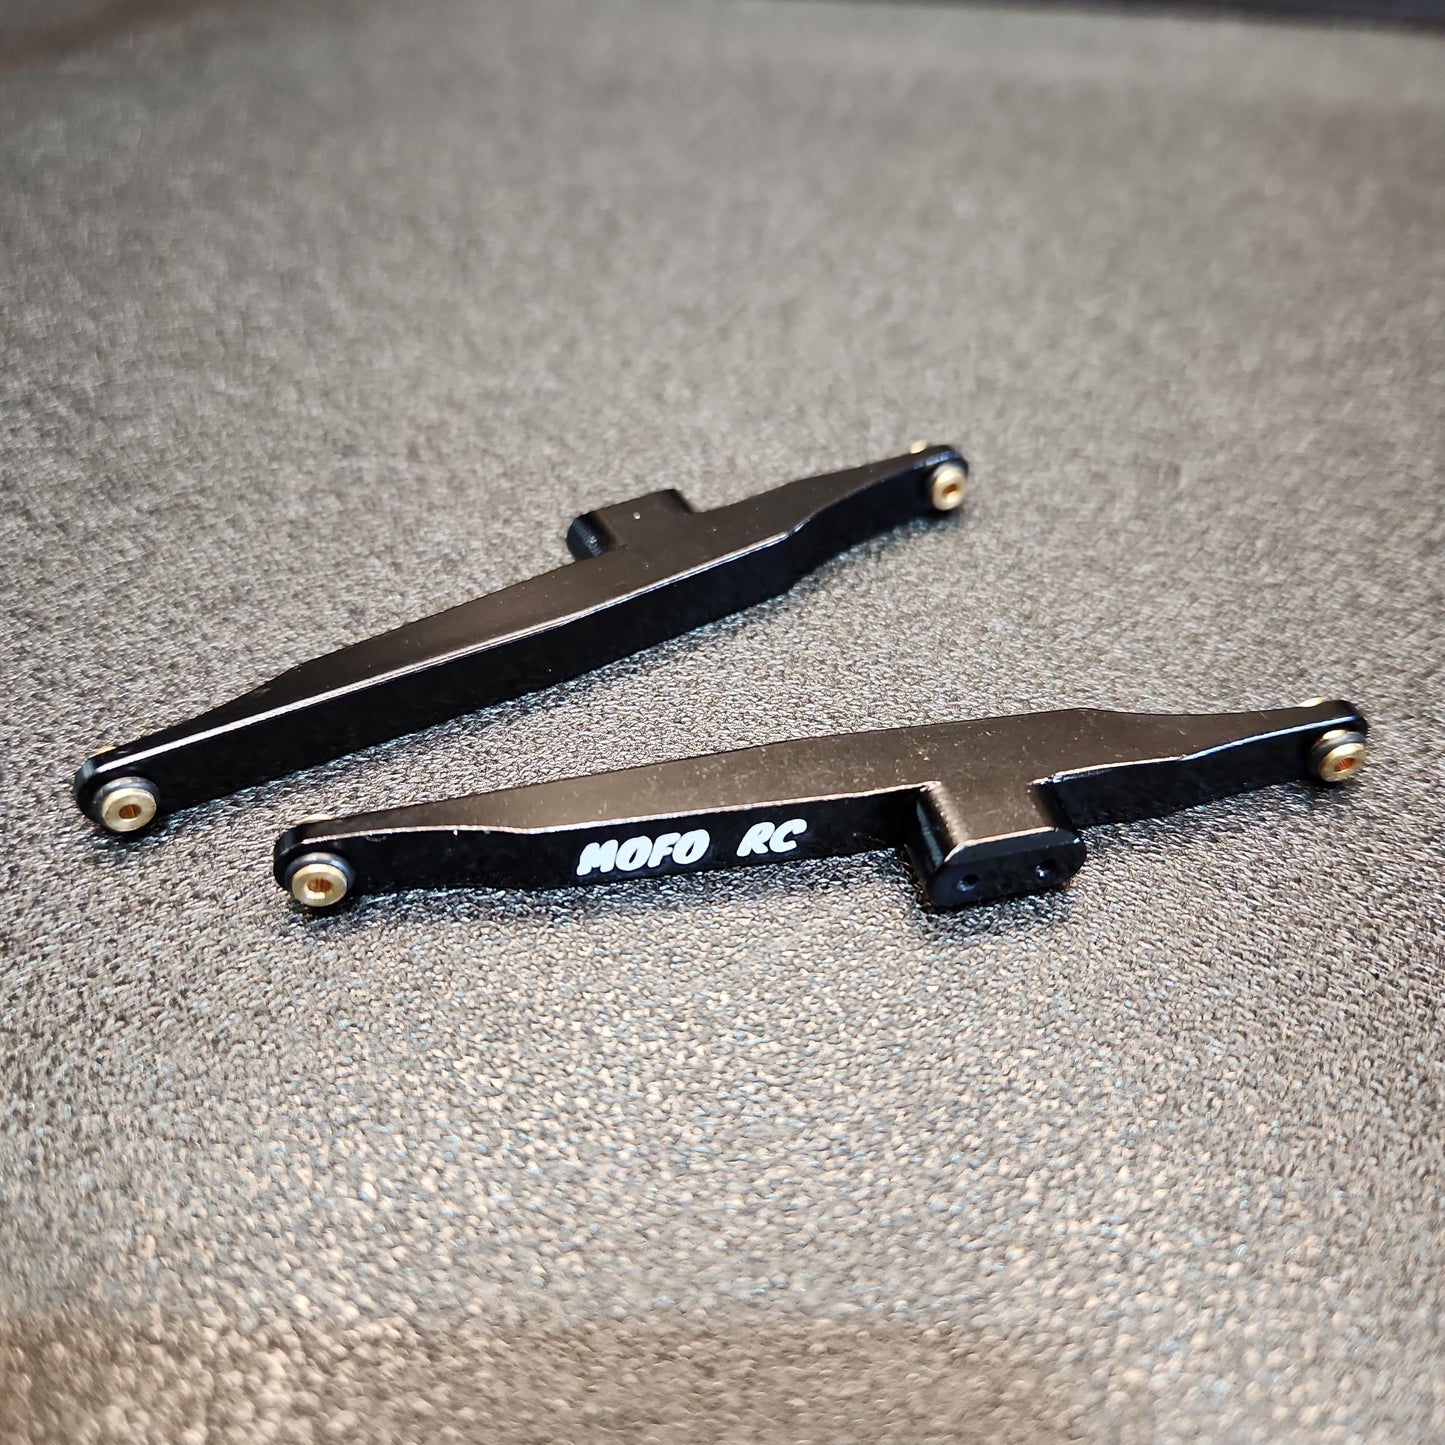 Aluminum Links Trailing Arms for axial scx24